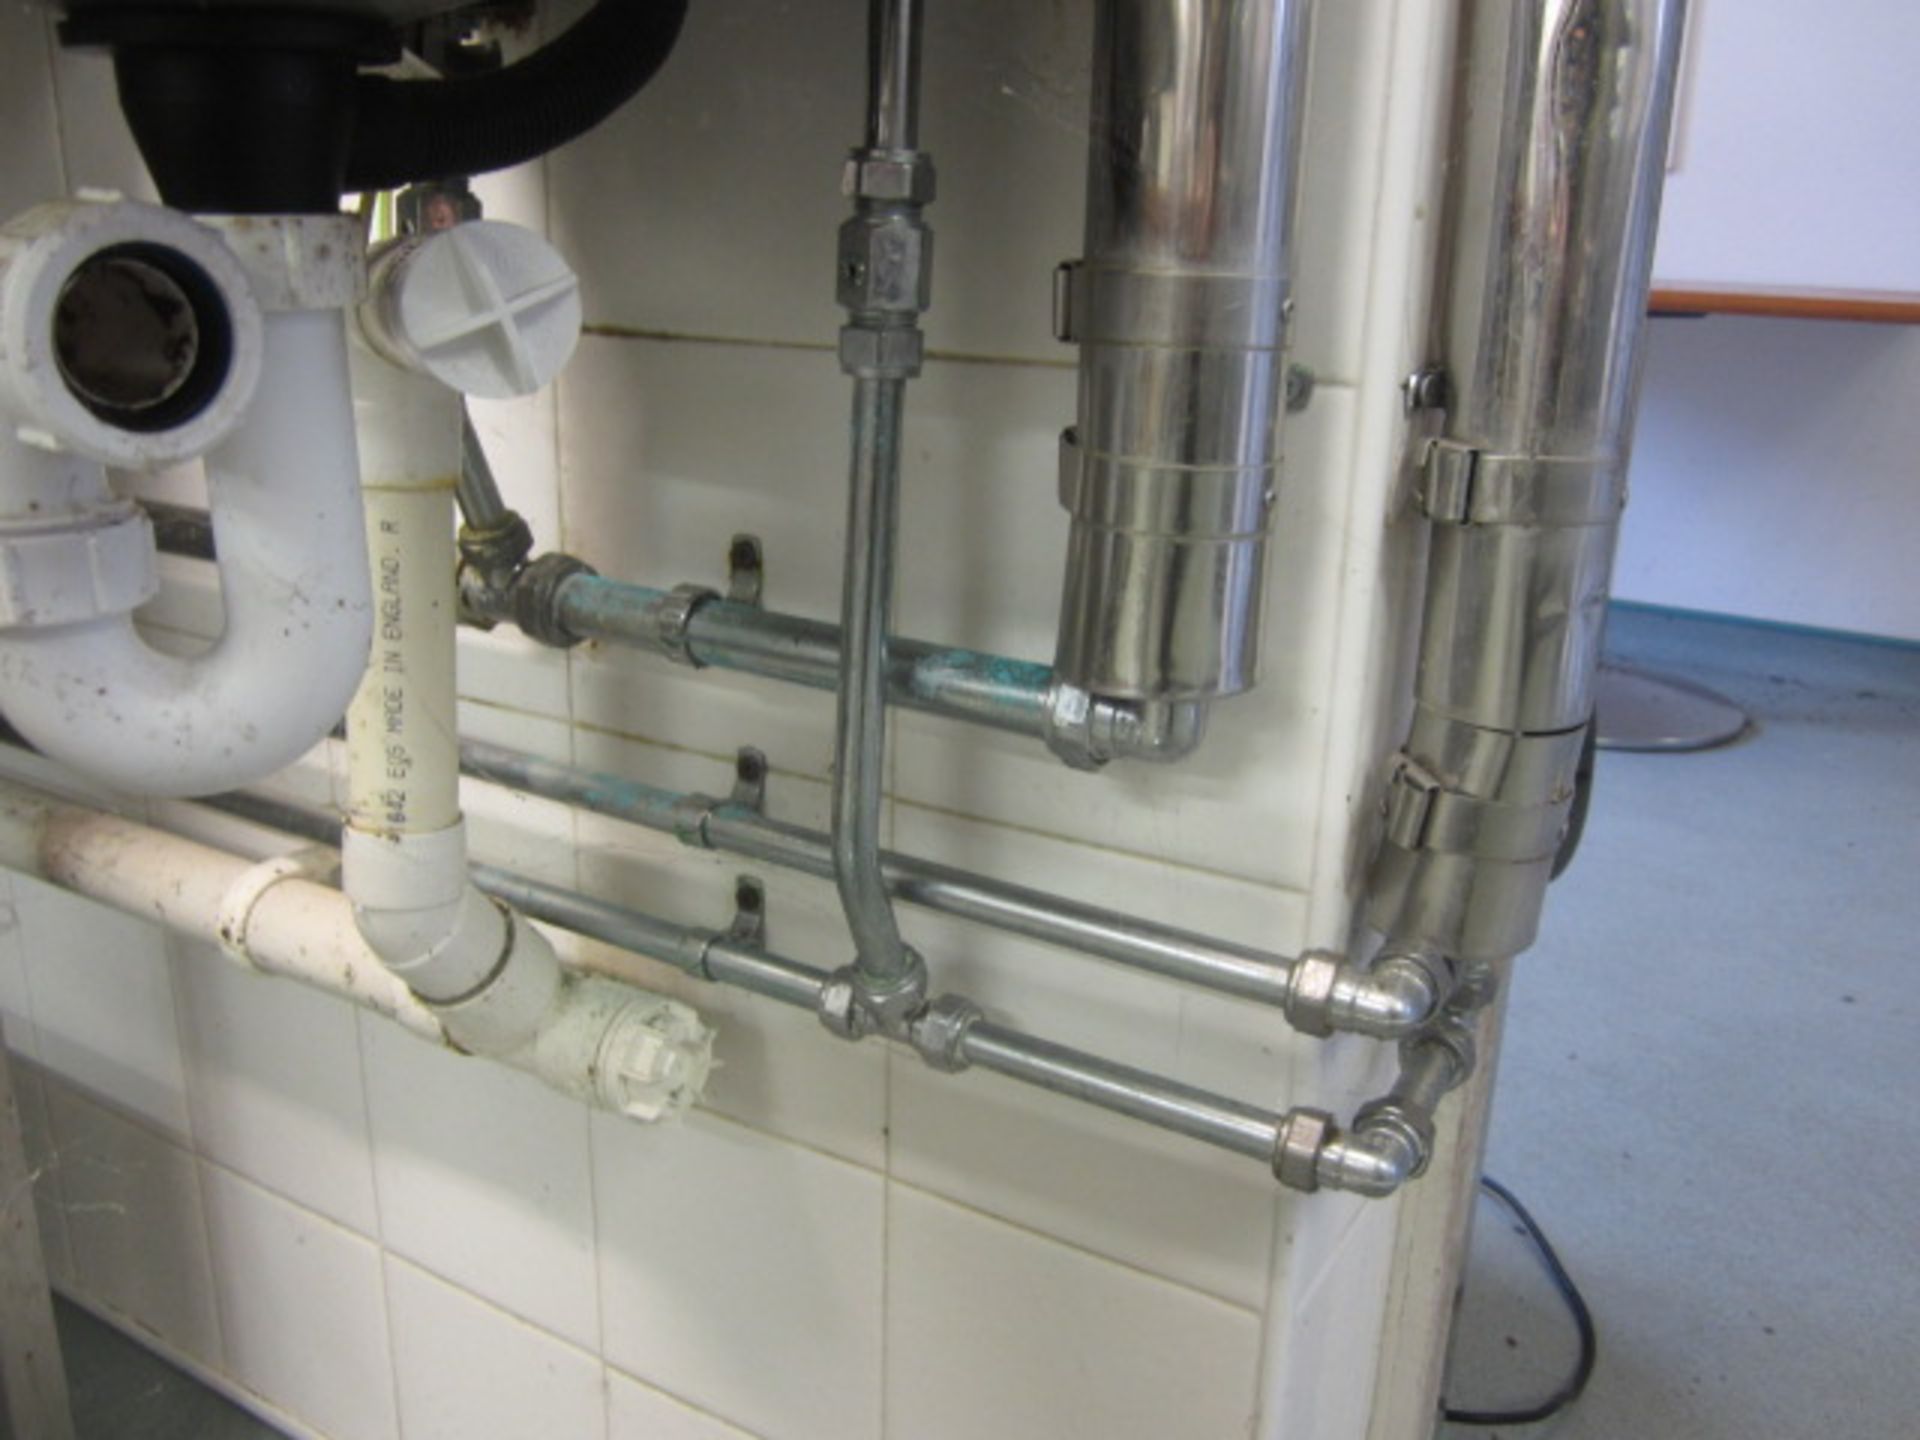 Two stainless steel wall mounted hand basins - Disconnection to be undertaken by the purchaser - Image 4 of 4